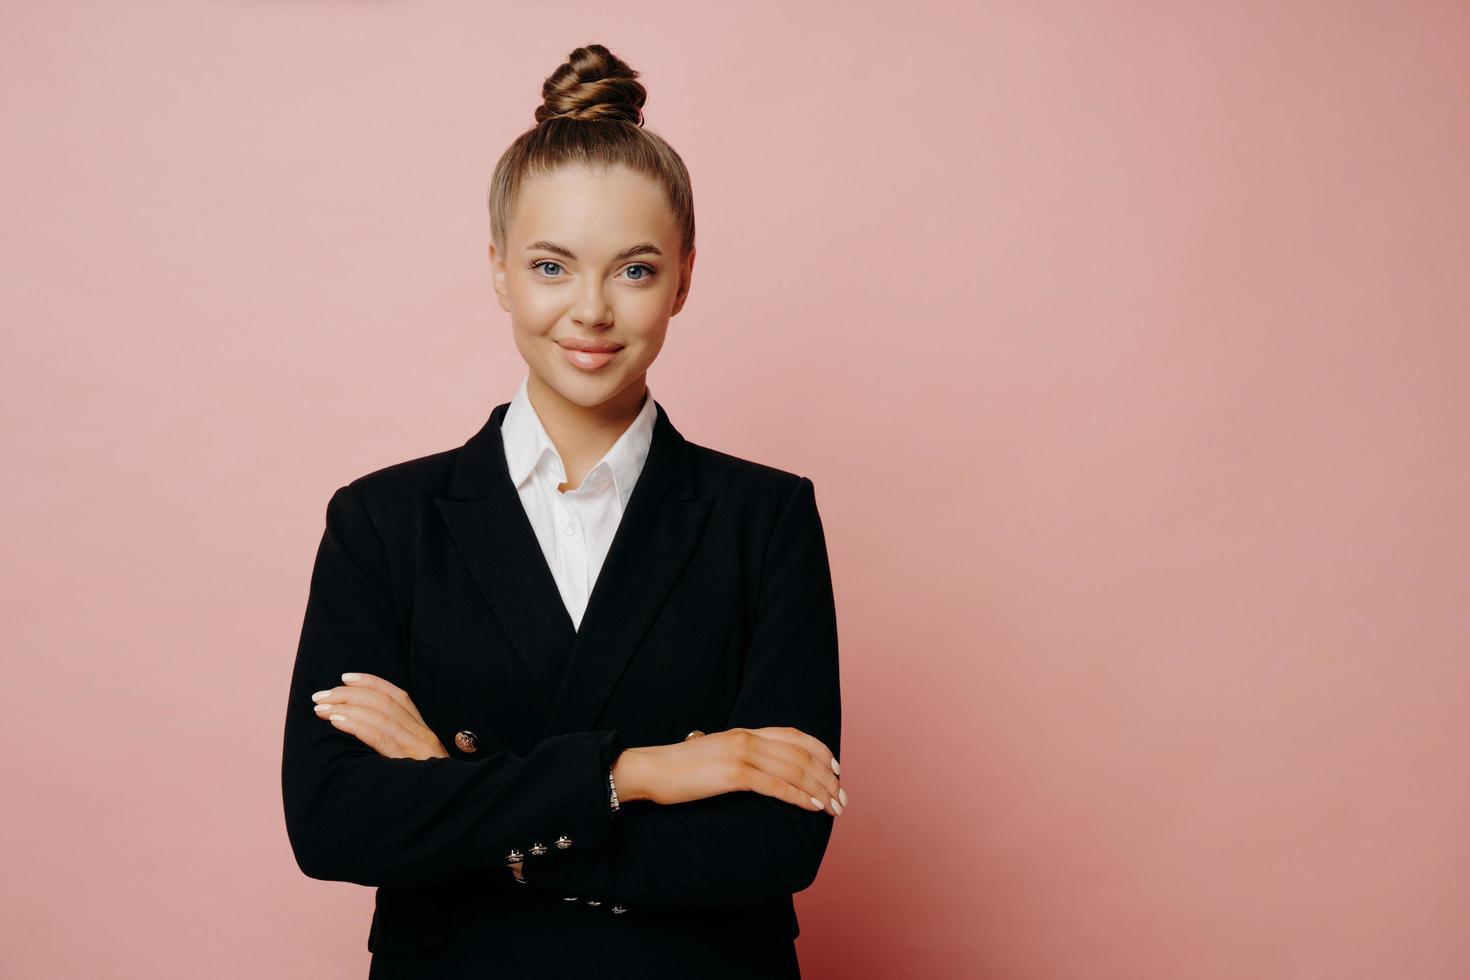 Confident female office worker with hair in bun posing isolated over pink background photo